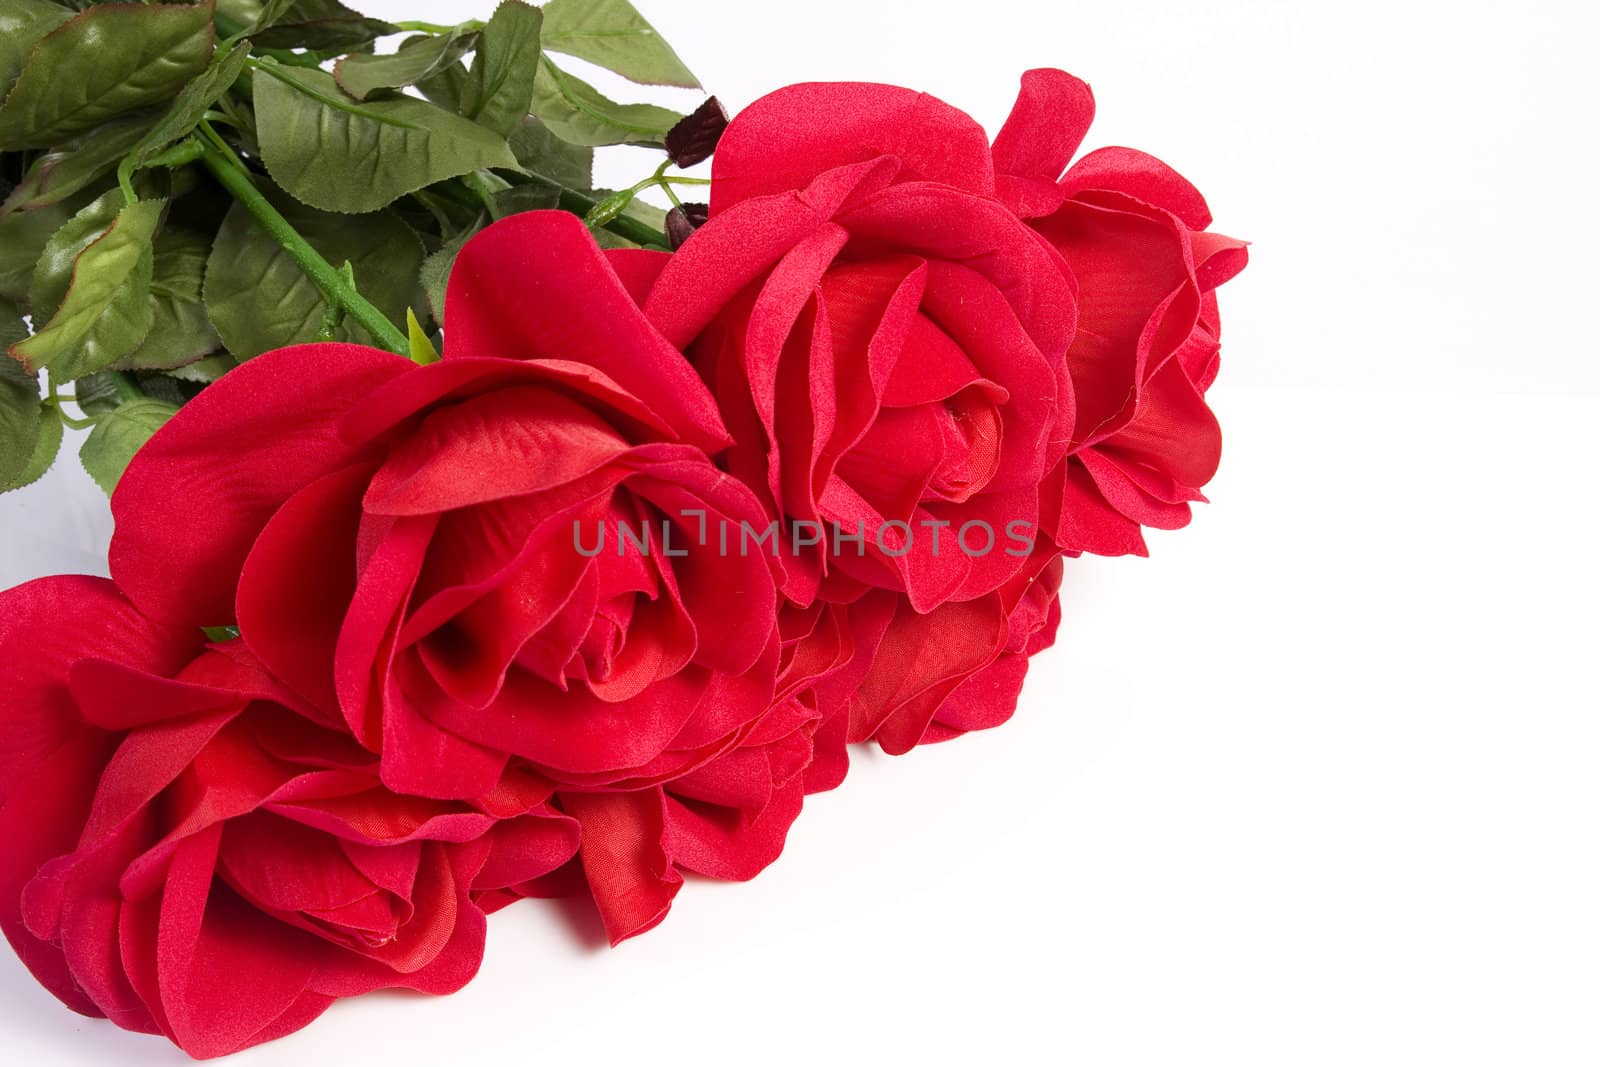 Fabric rose bouquet on isolated white